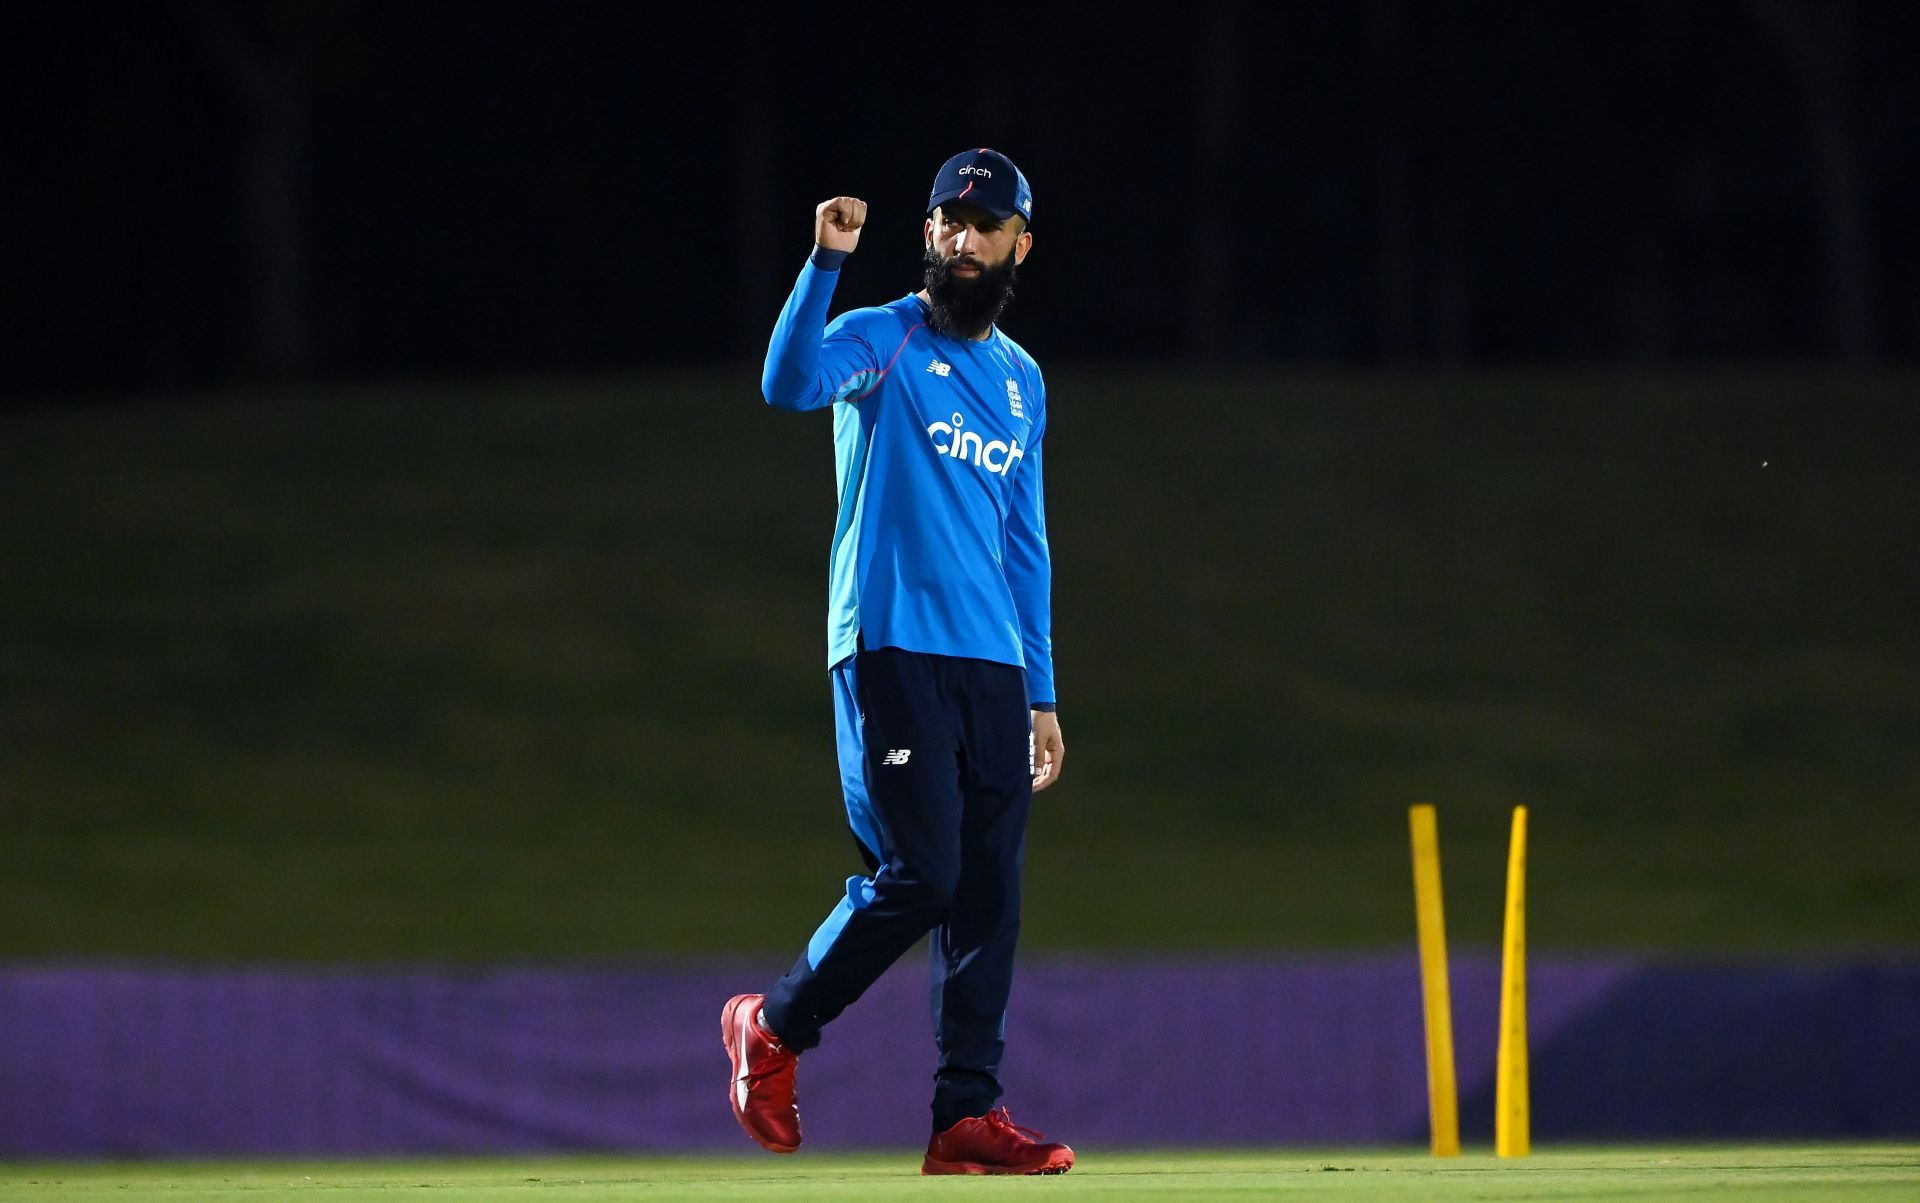 All-rounder Moeen Ali of the Northern Warriors